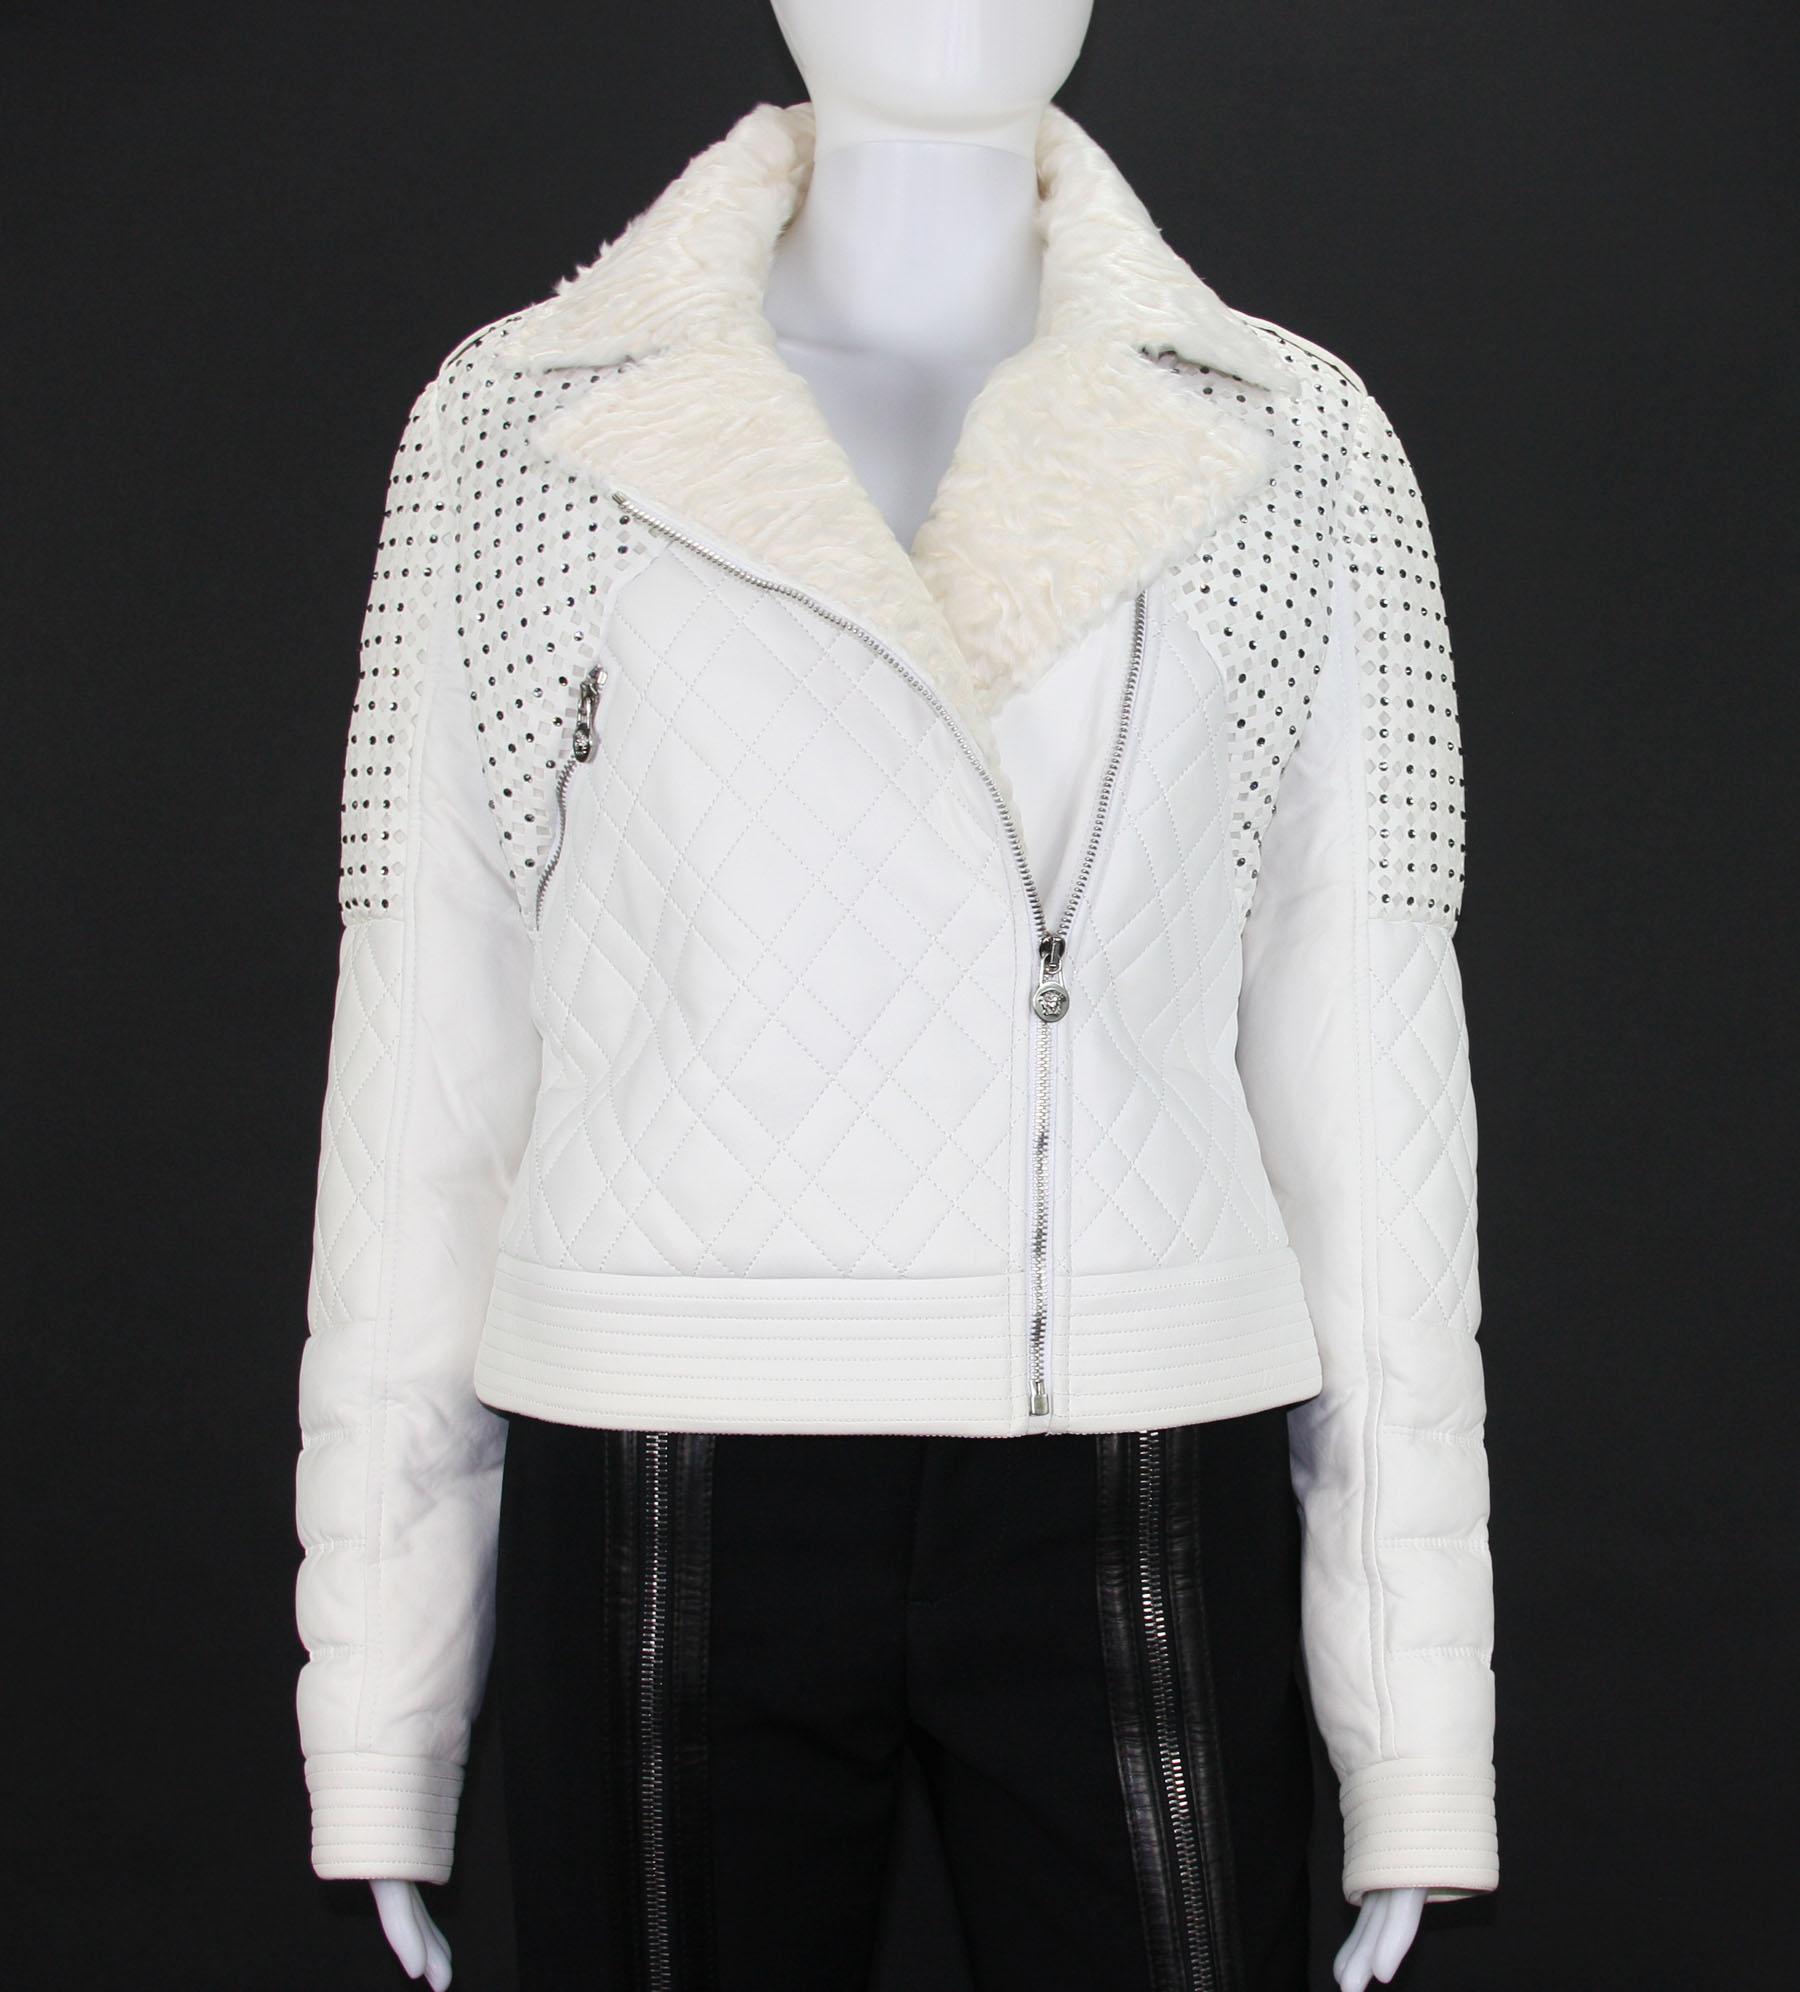 New Versace Women's White Leather Beaded Down Jacket with Fur Collar
F/W 2016 Collection
Designer size - 42
100% Lamb Skin ( Origin - Namibia), Goose Down, Persian Lamb Collar, Laser Cut Design with Swarovski Crystals, Silk Lining.
Double Breasted,